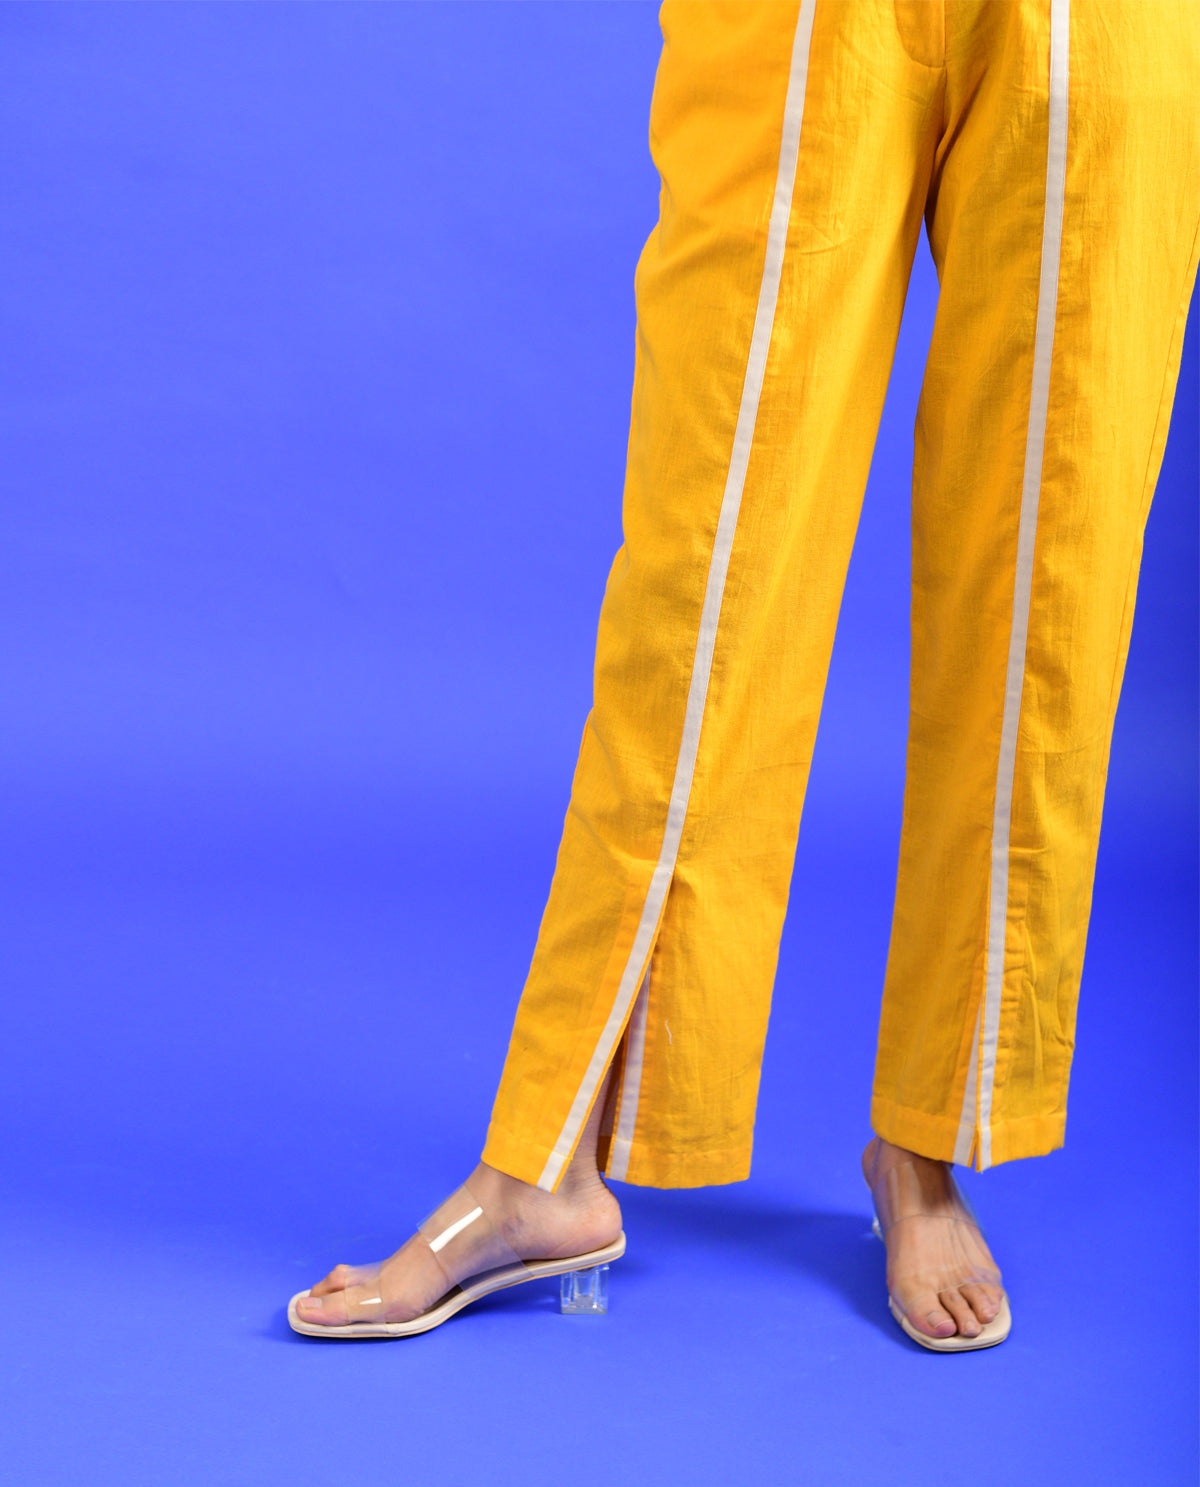 Yellow Solid Pants at Kamakhyaa by Rias Jaipur. This item is Casual Wear, Handloom Cotton, Handspun, Handwoven, Hue, Pants, Regular Fit, Solids, Stripes, Womenswear, Yellow